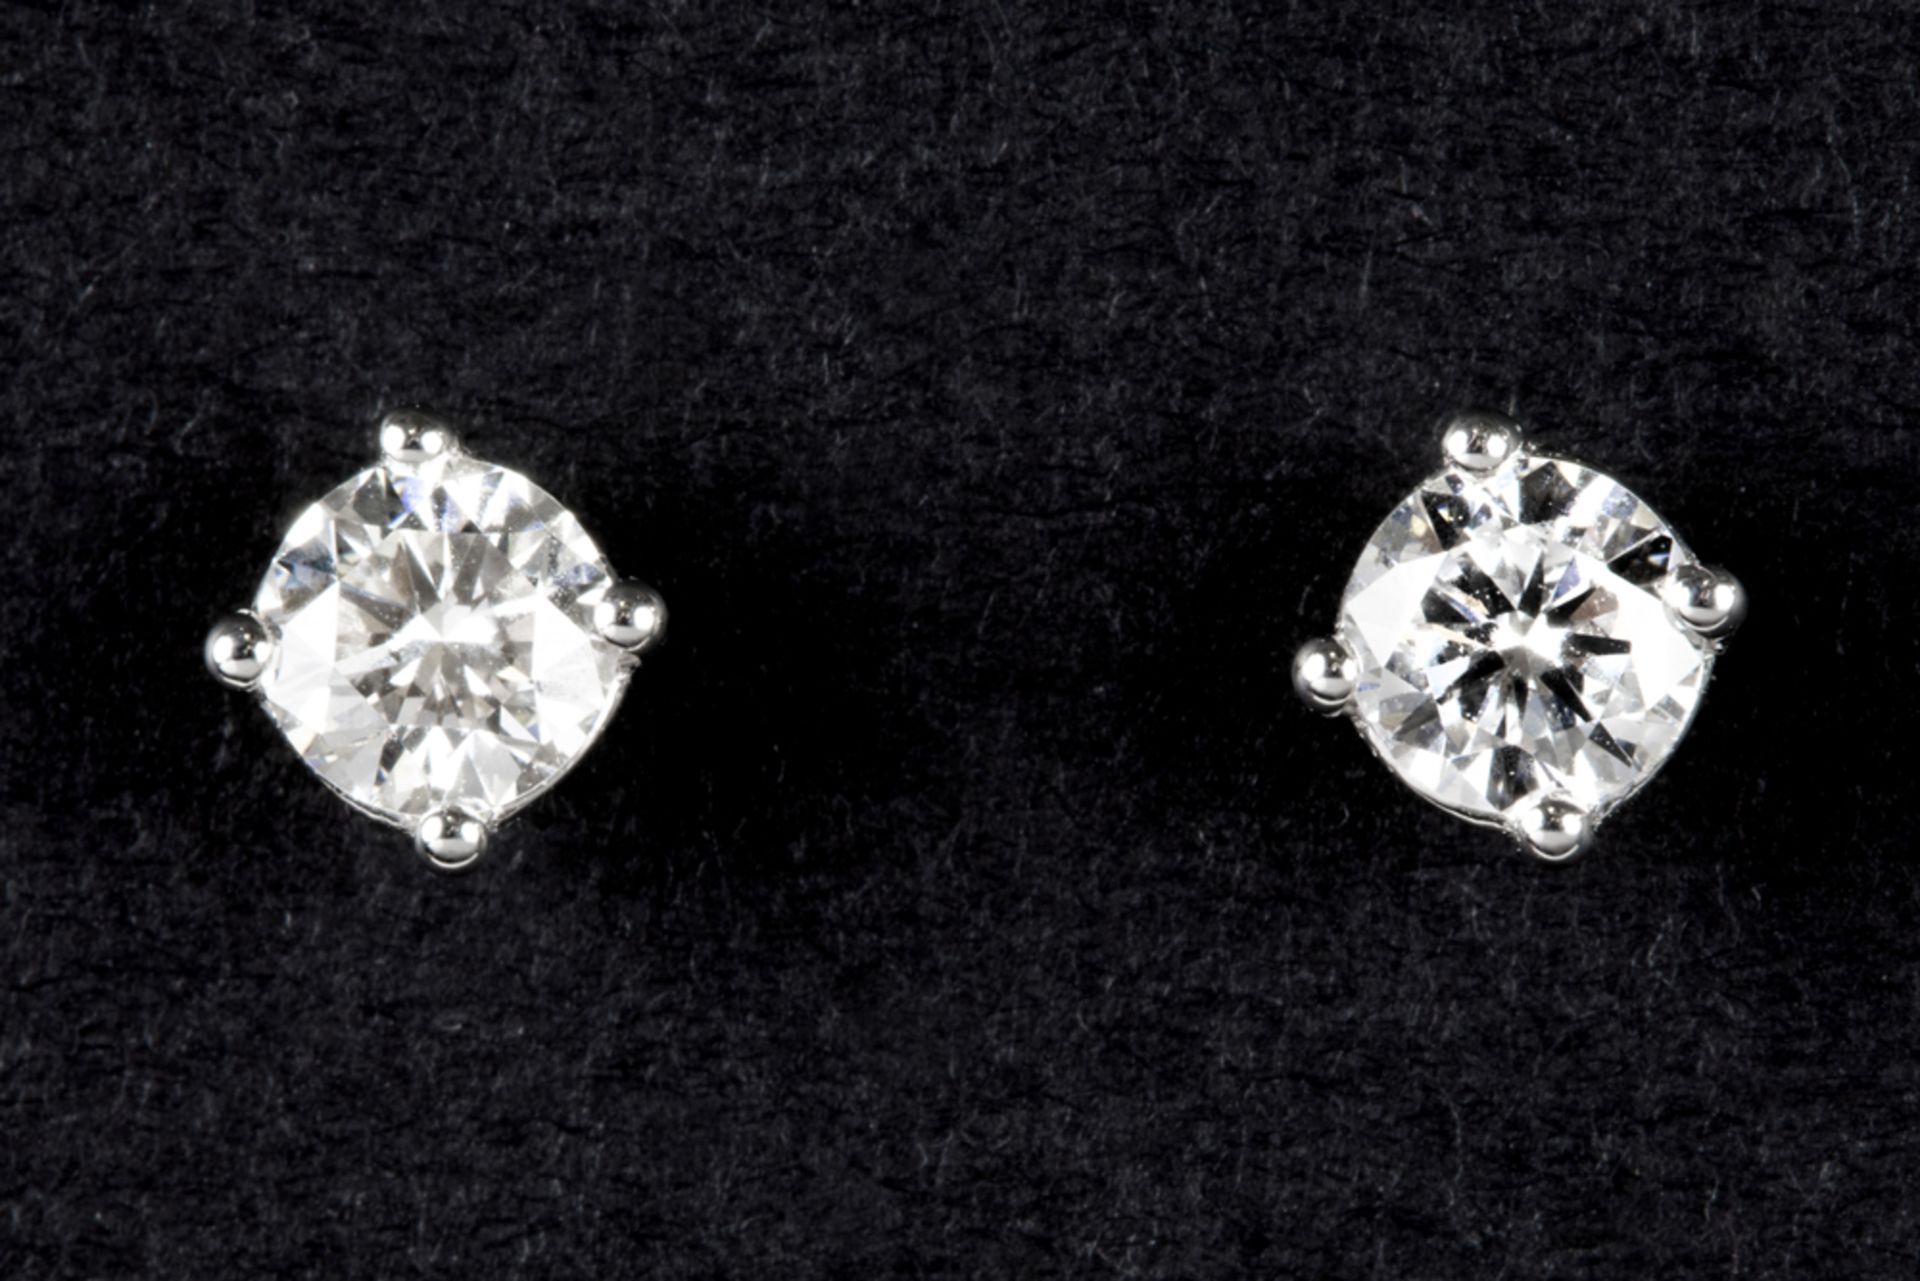 pair of earrings in white gold (18 carat) each with a bigger diamond surrounded by small ones - in - Bild 3 aus 3